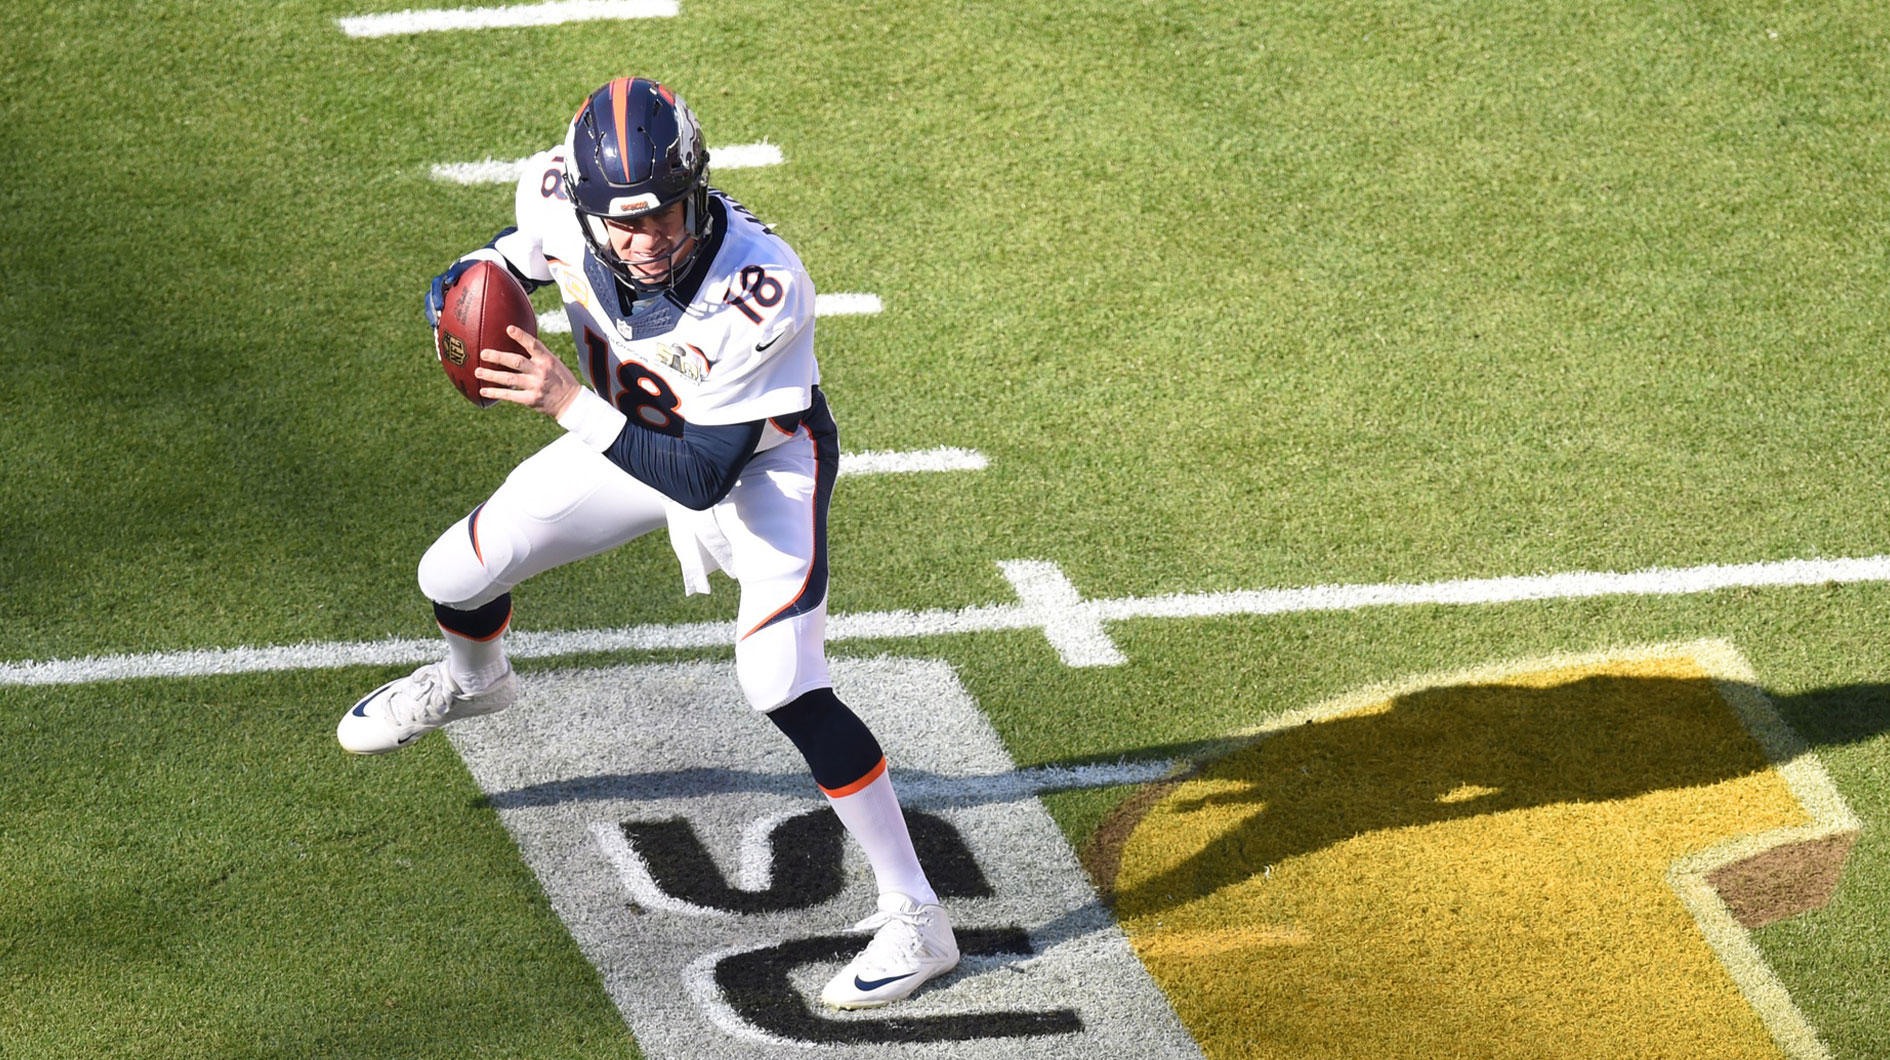 Peyton Manning, one of the greatest athletes ever, winning his final game, Super Bowl 50